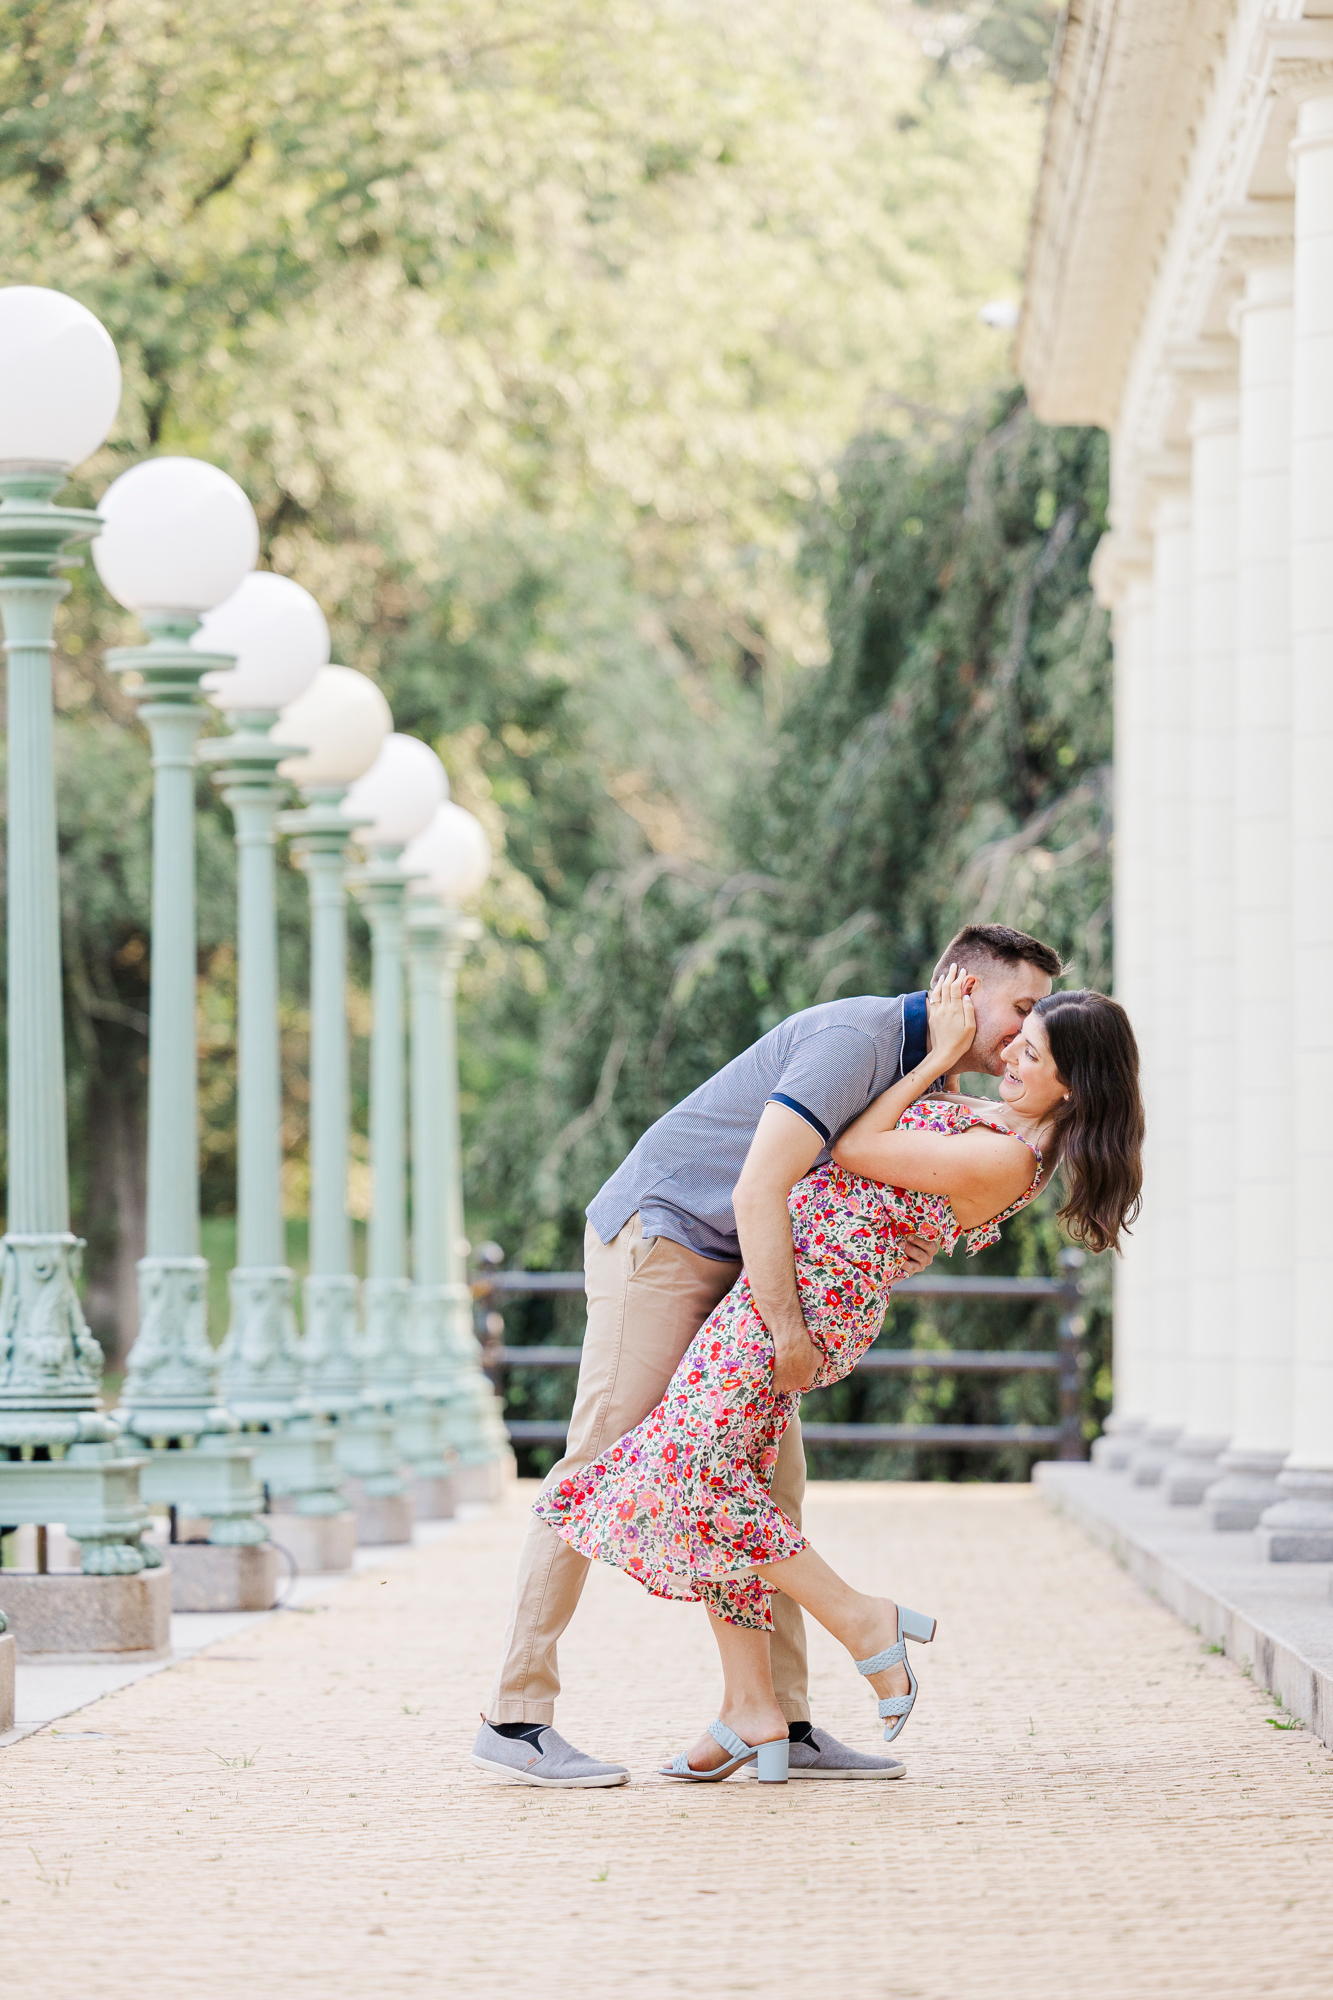 Incredible engagement session in Prospect Park